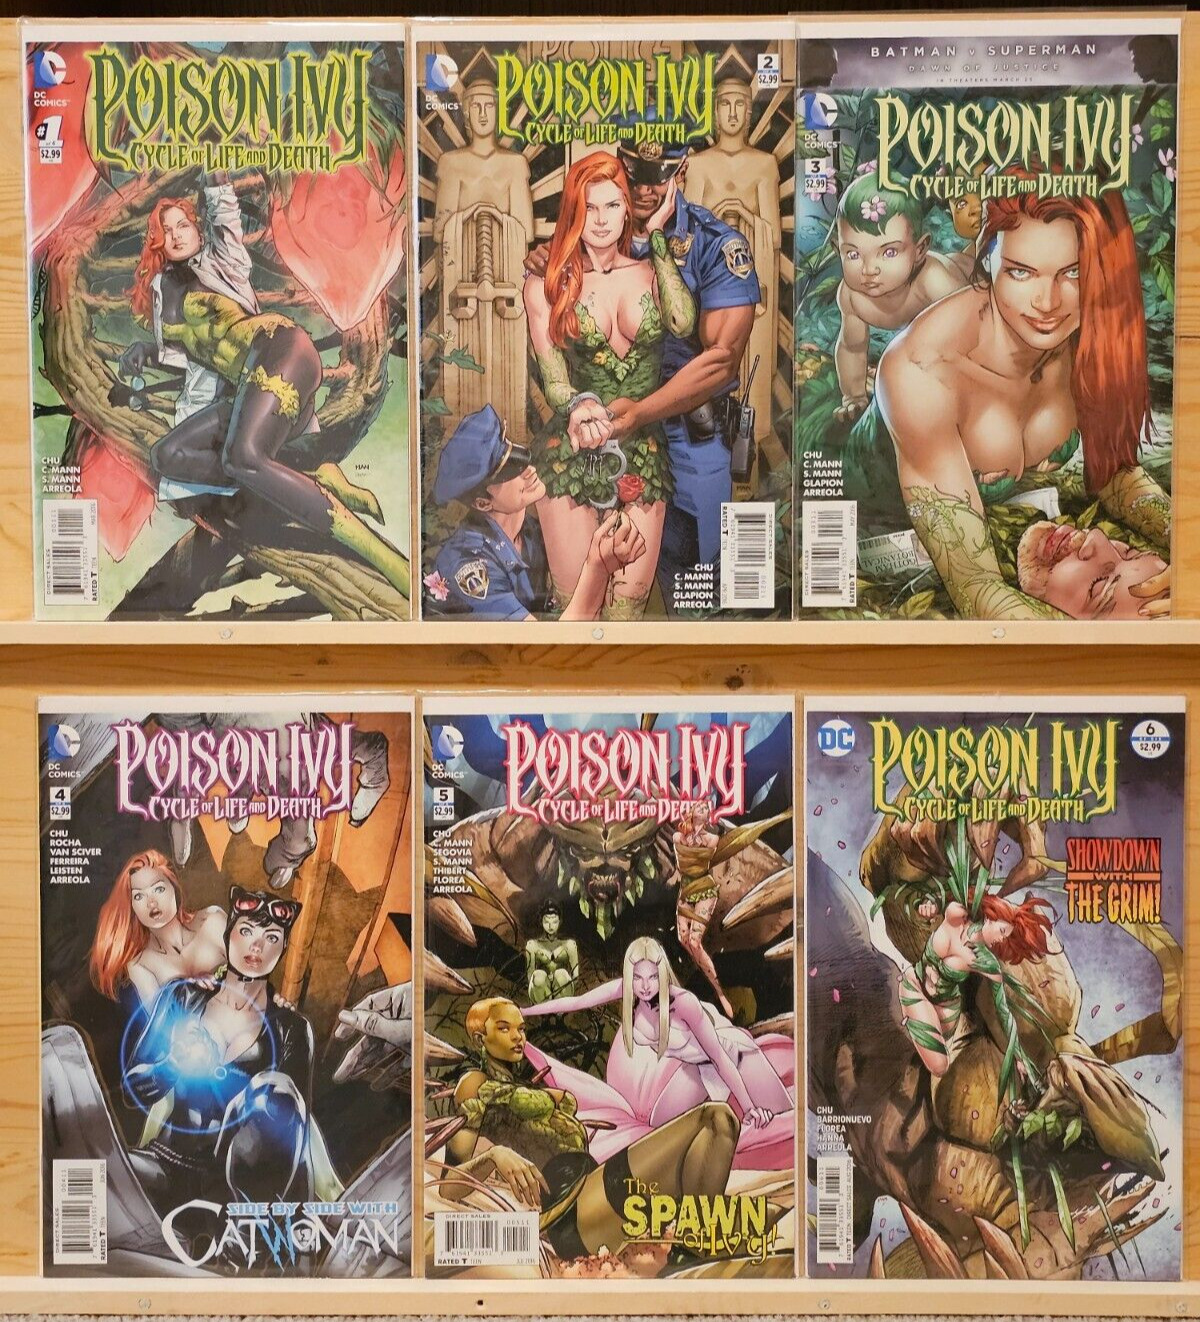 Poison Ivy: Cycle of Life and Death #1 2 3 4 5 6 (1-6) DC Complete 2016